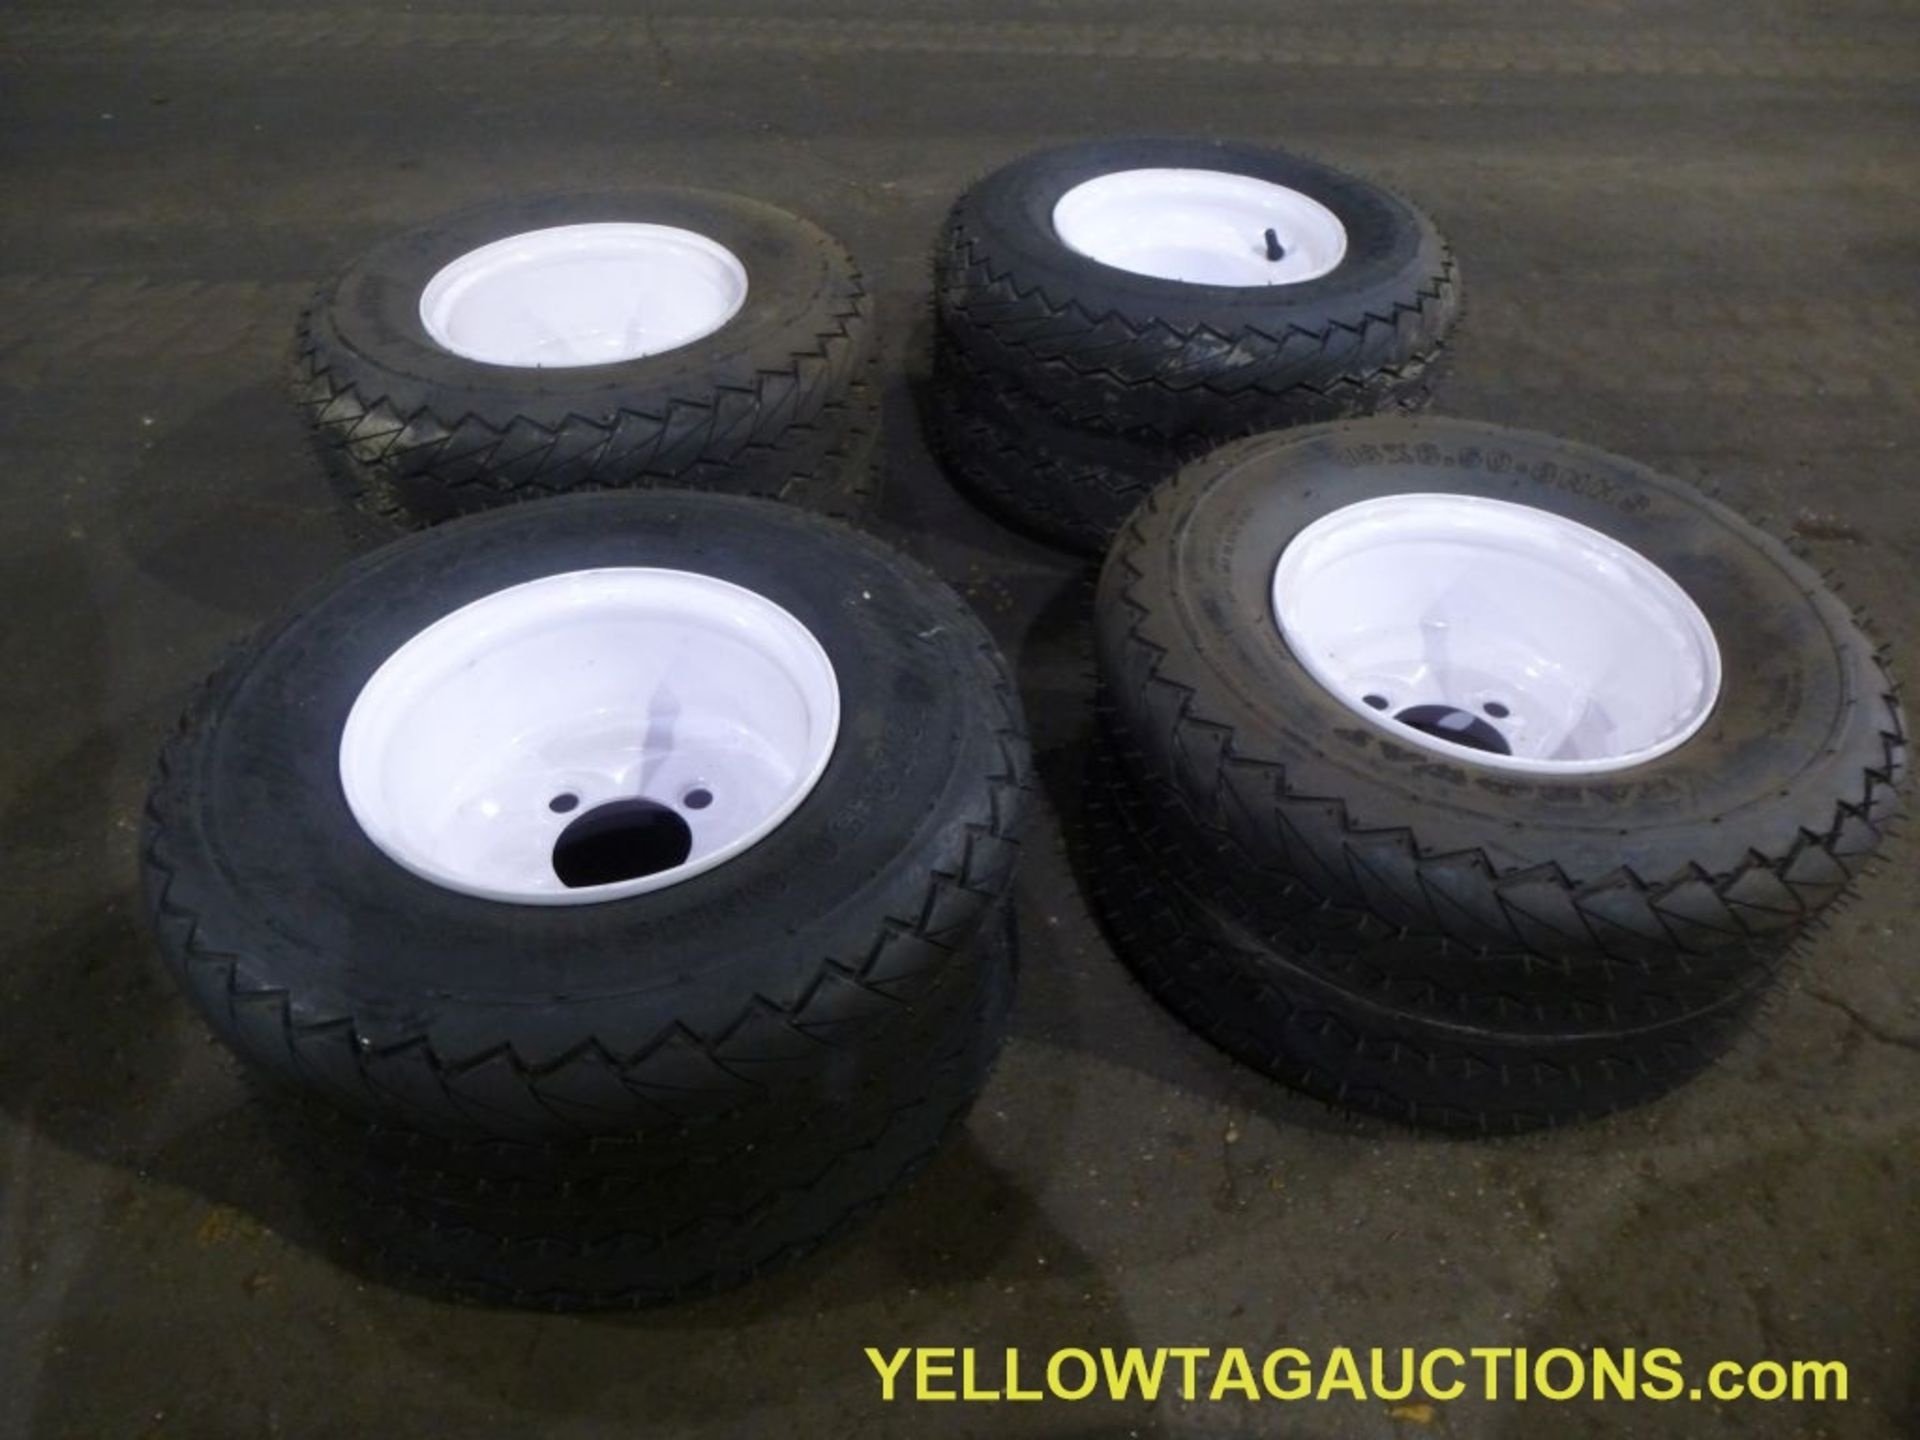 Lot of (12) FarWay 6-Ply Nylon Tires & Wheels|18 X 8.50 - 8NHS|Tag: 449 - Image 2 of 8